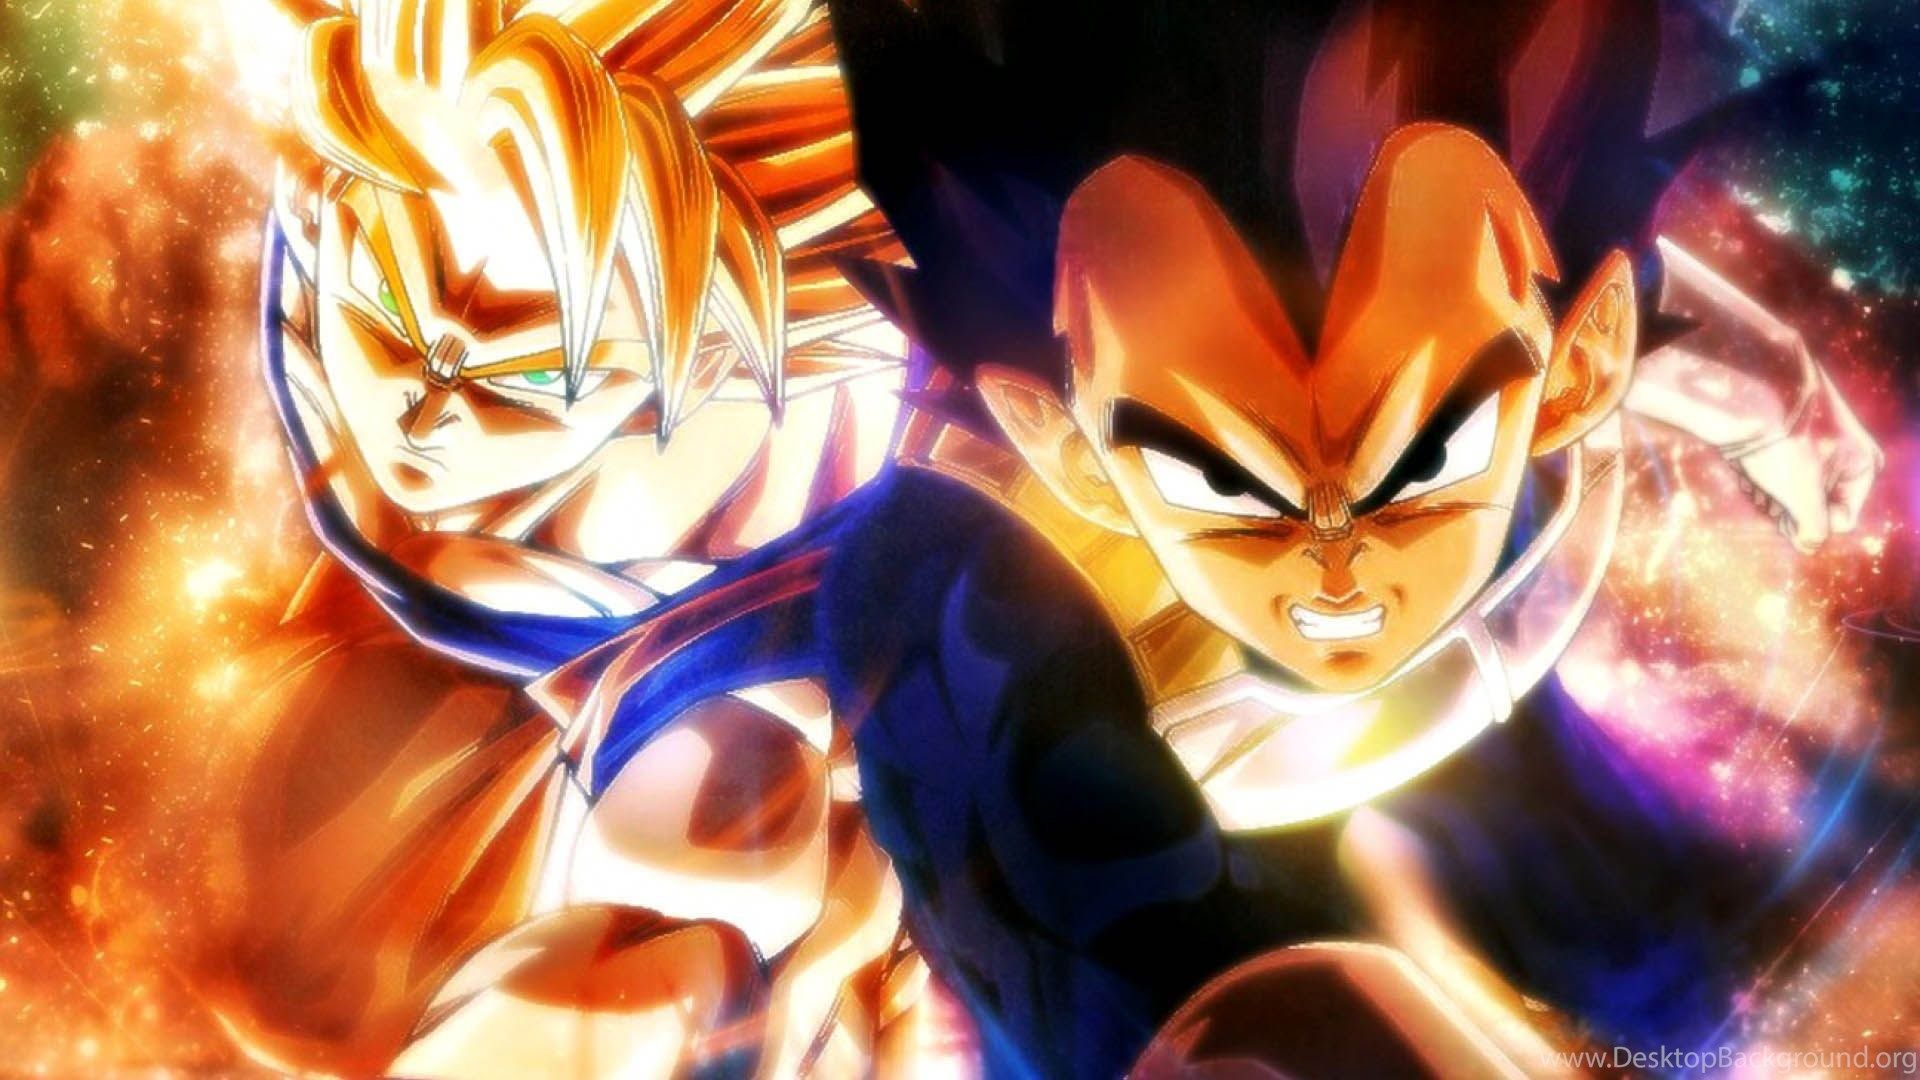 Dragon Ball Super Chapter 58 Release Date, Predictions Goku and Vegeta Team-up to Fight the Wizard Moro